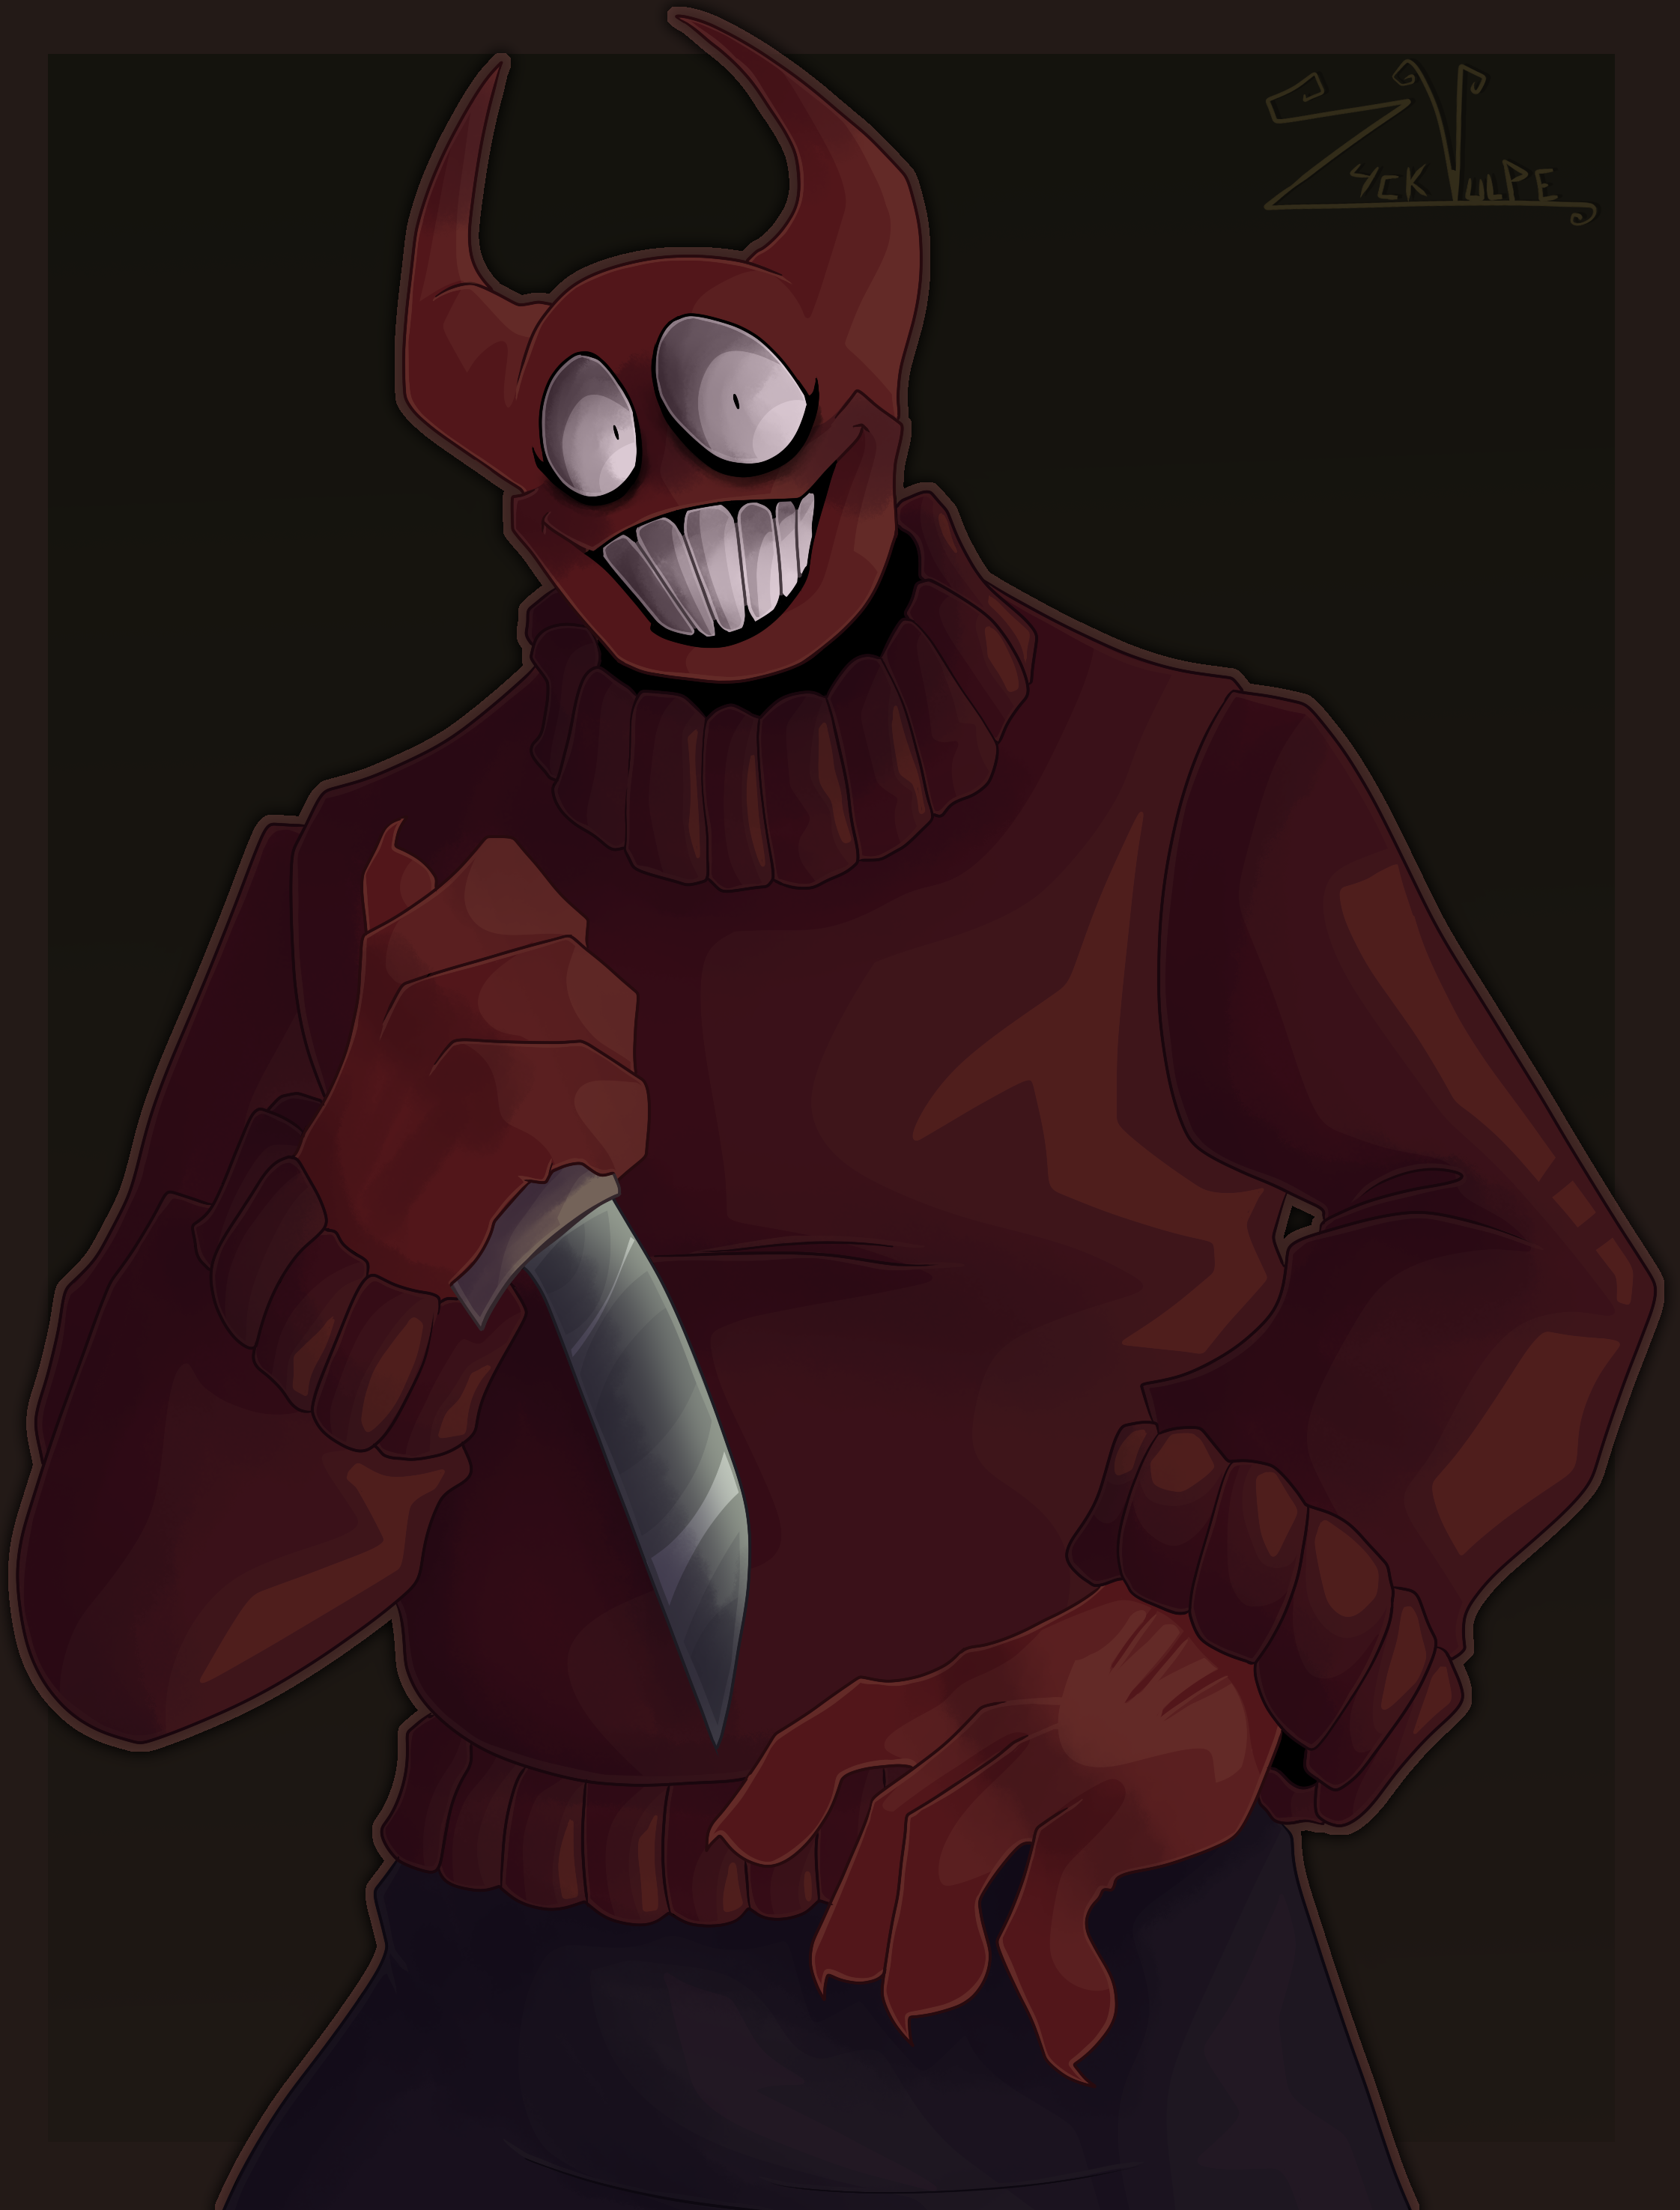 The guy from spooky month, who's named bob by GioPeppers on